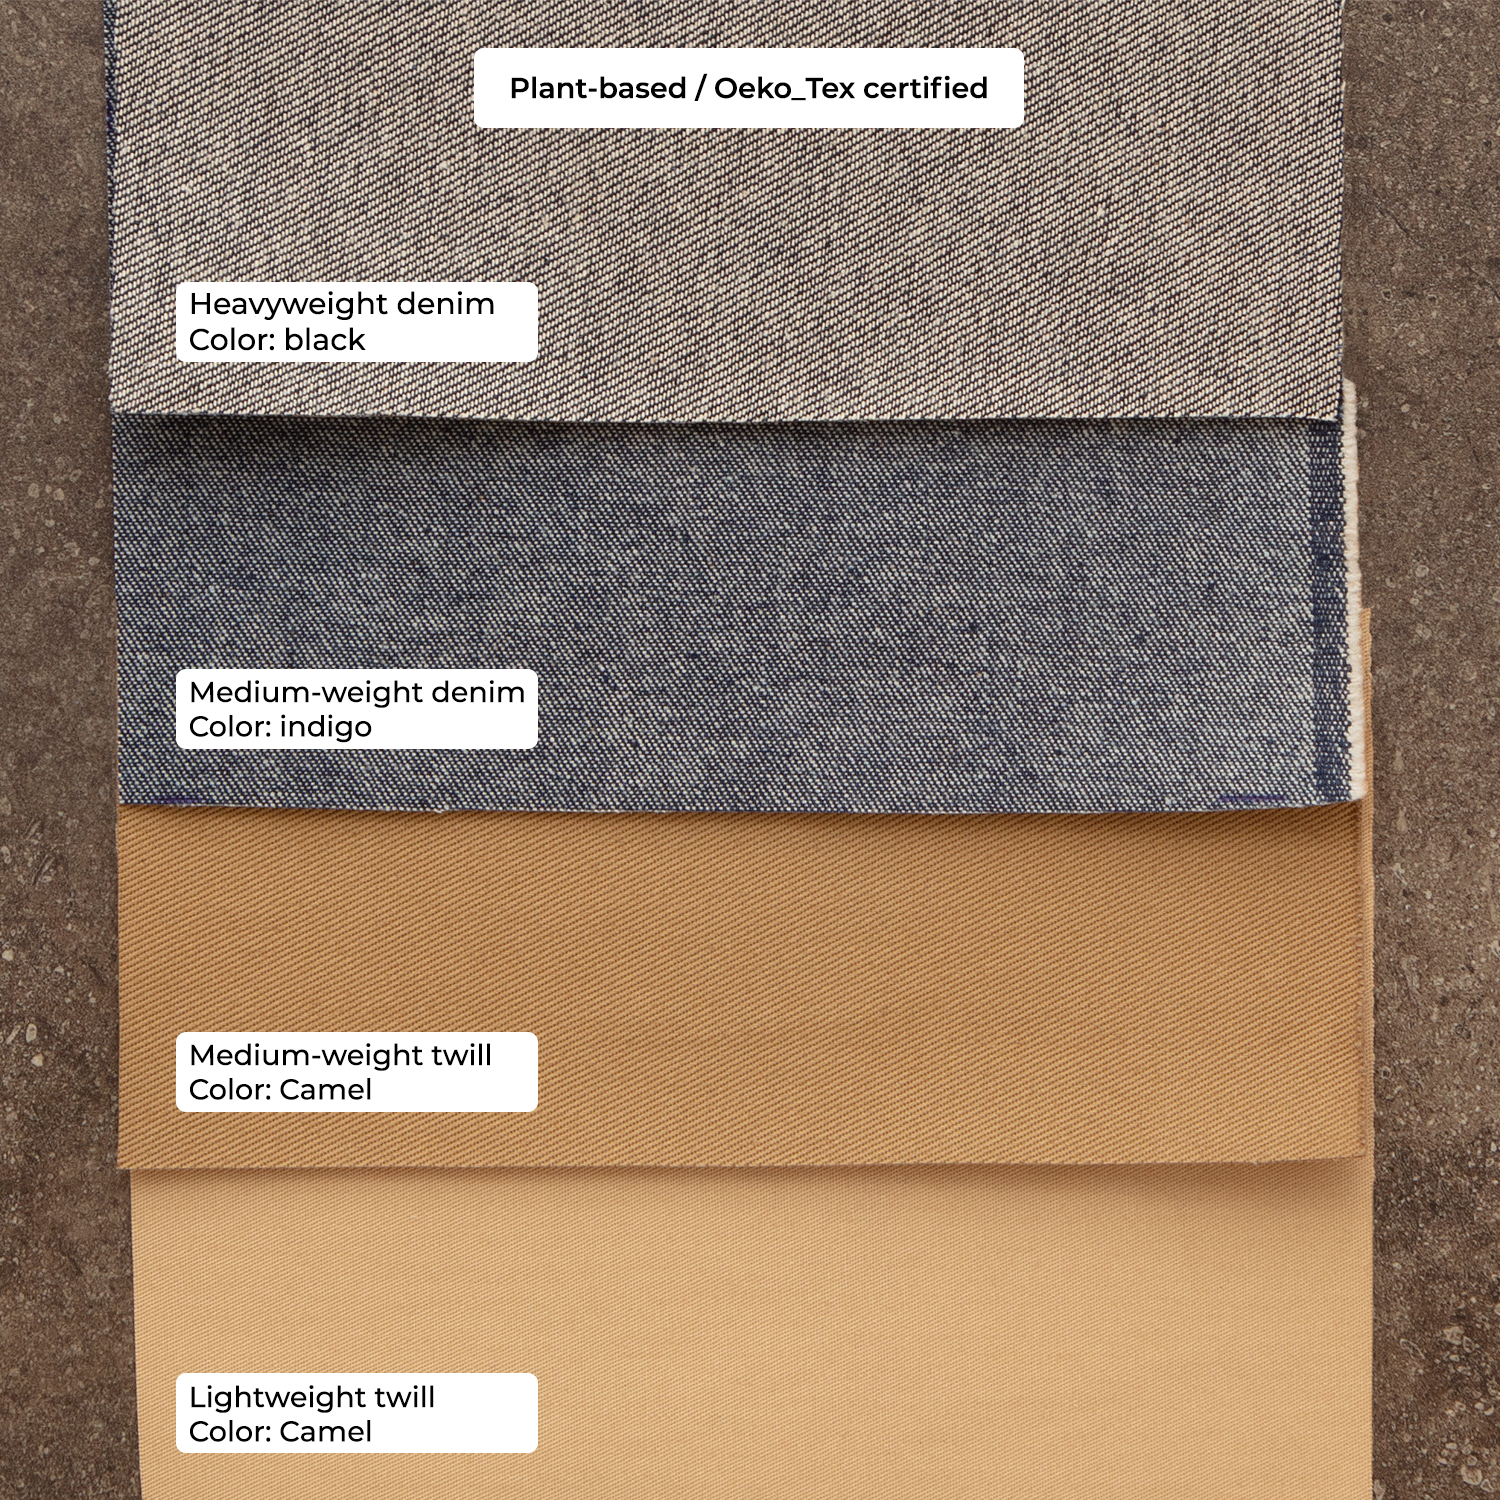 Coloured cork fabric - Brown shades - plant-based backings